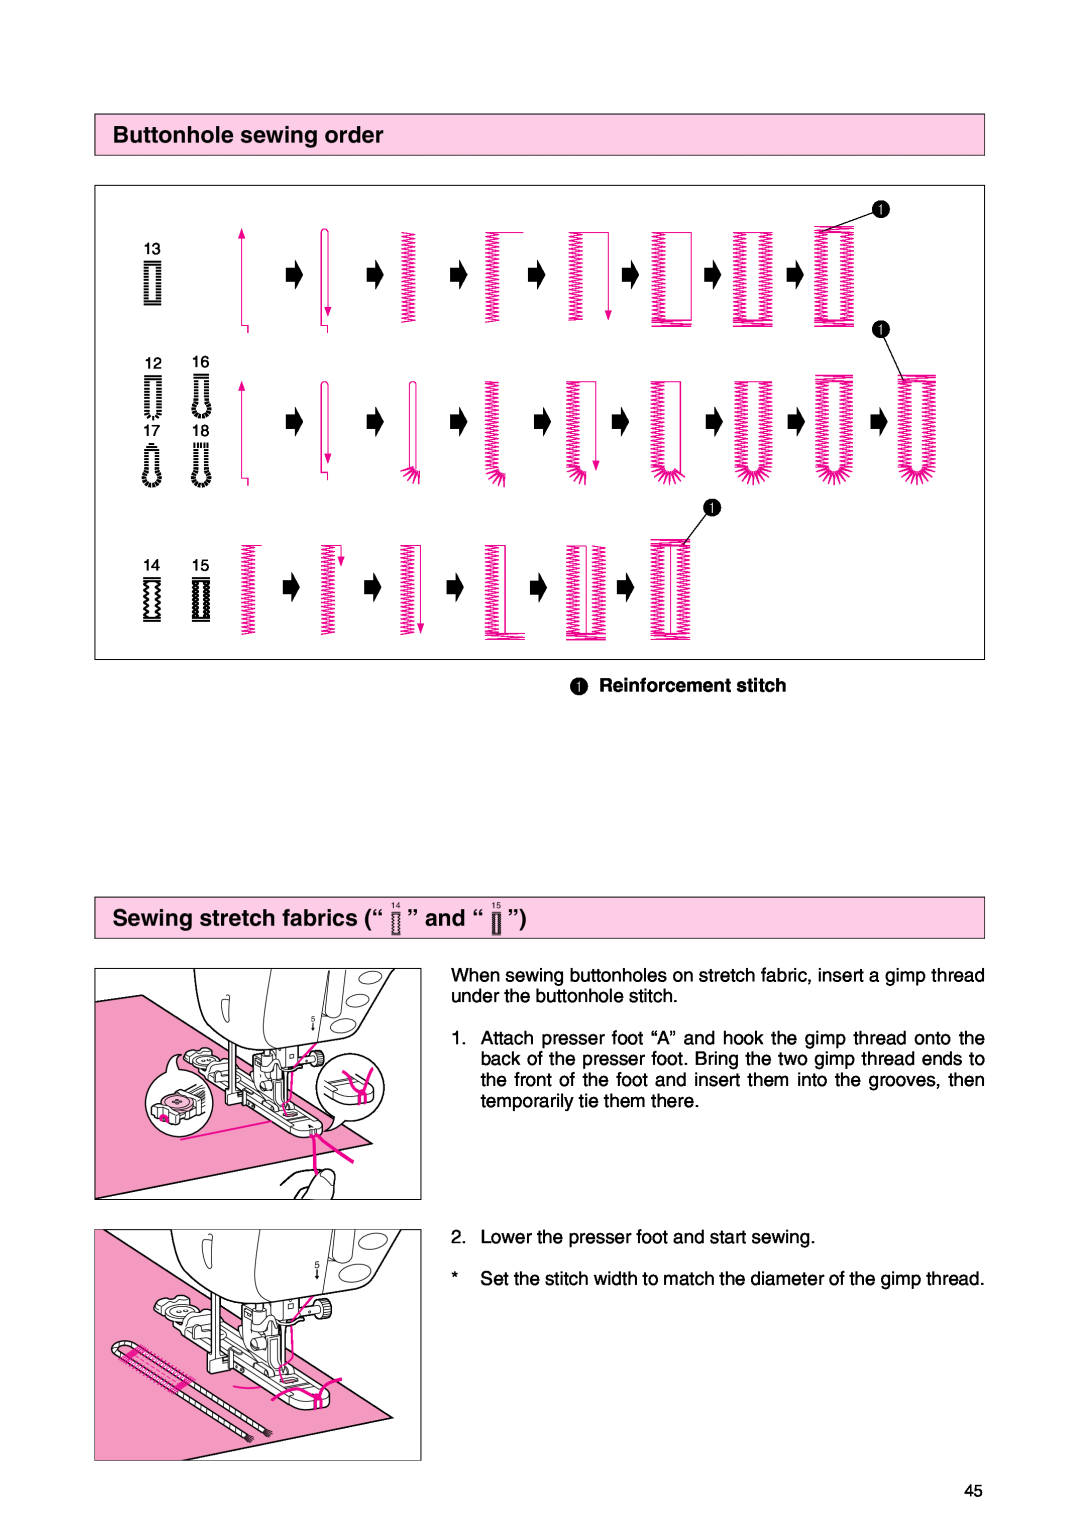 Brother PC 3000 operation manual Buttonhole sewing order, Sewing stretch fabrics “ ” and “ ”, Reinforcement stitch 